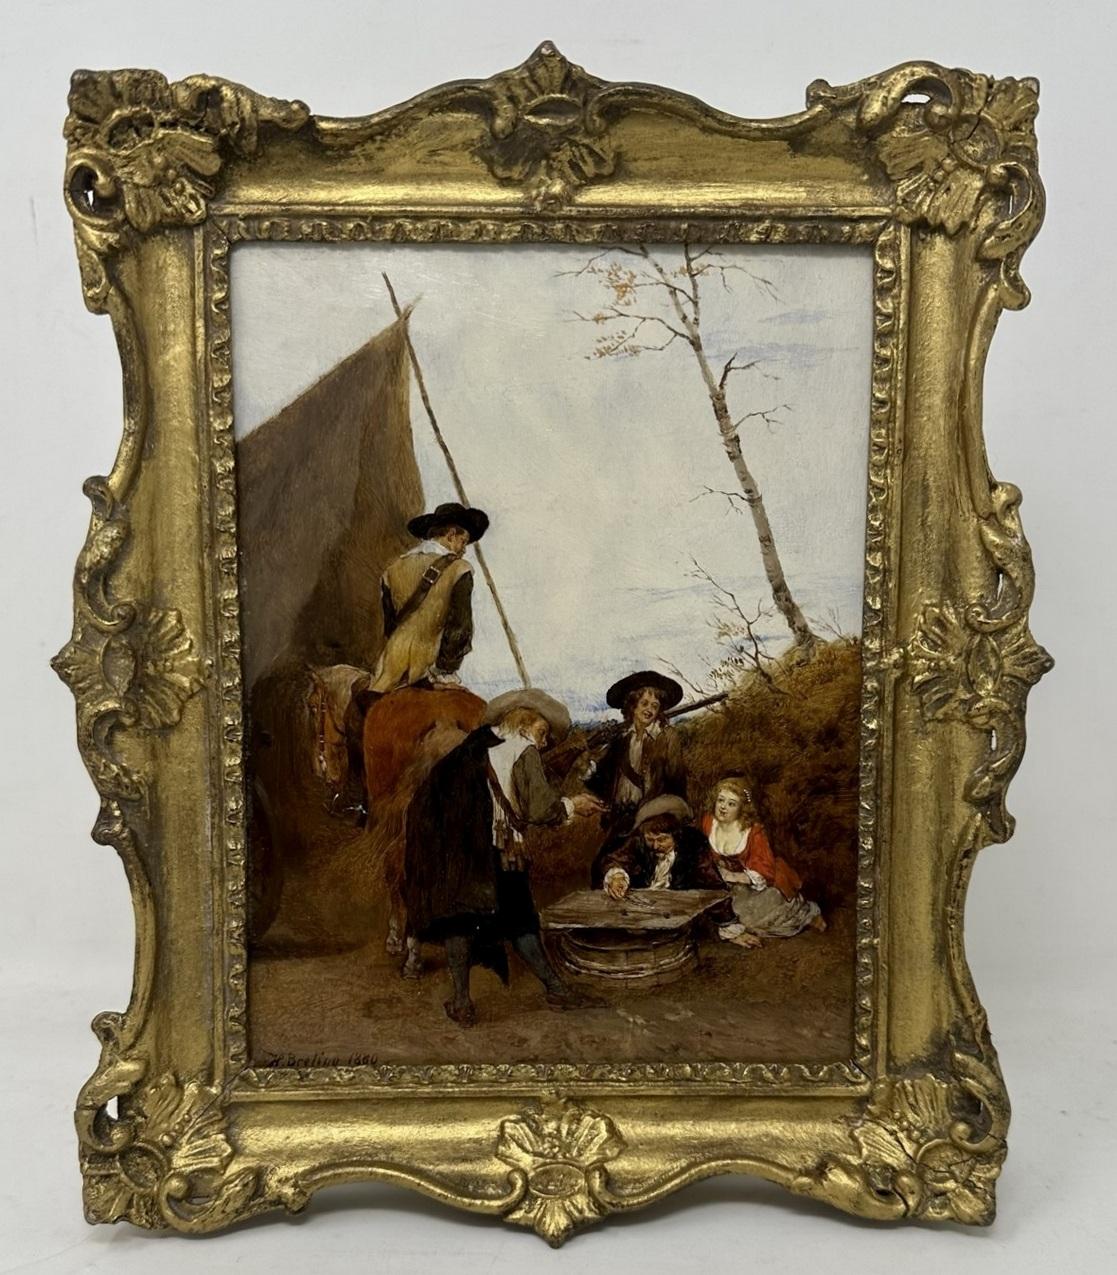 An exceptionally fine quality example of a framed German Victorian Oil Painting on Artists board of compact Size depicting Cavaliers in Landscape. Complete with its original good quality ornate gilt frame.
Last quarter of the Nineteenth